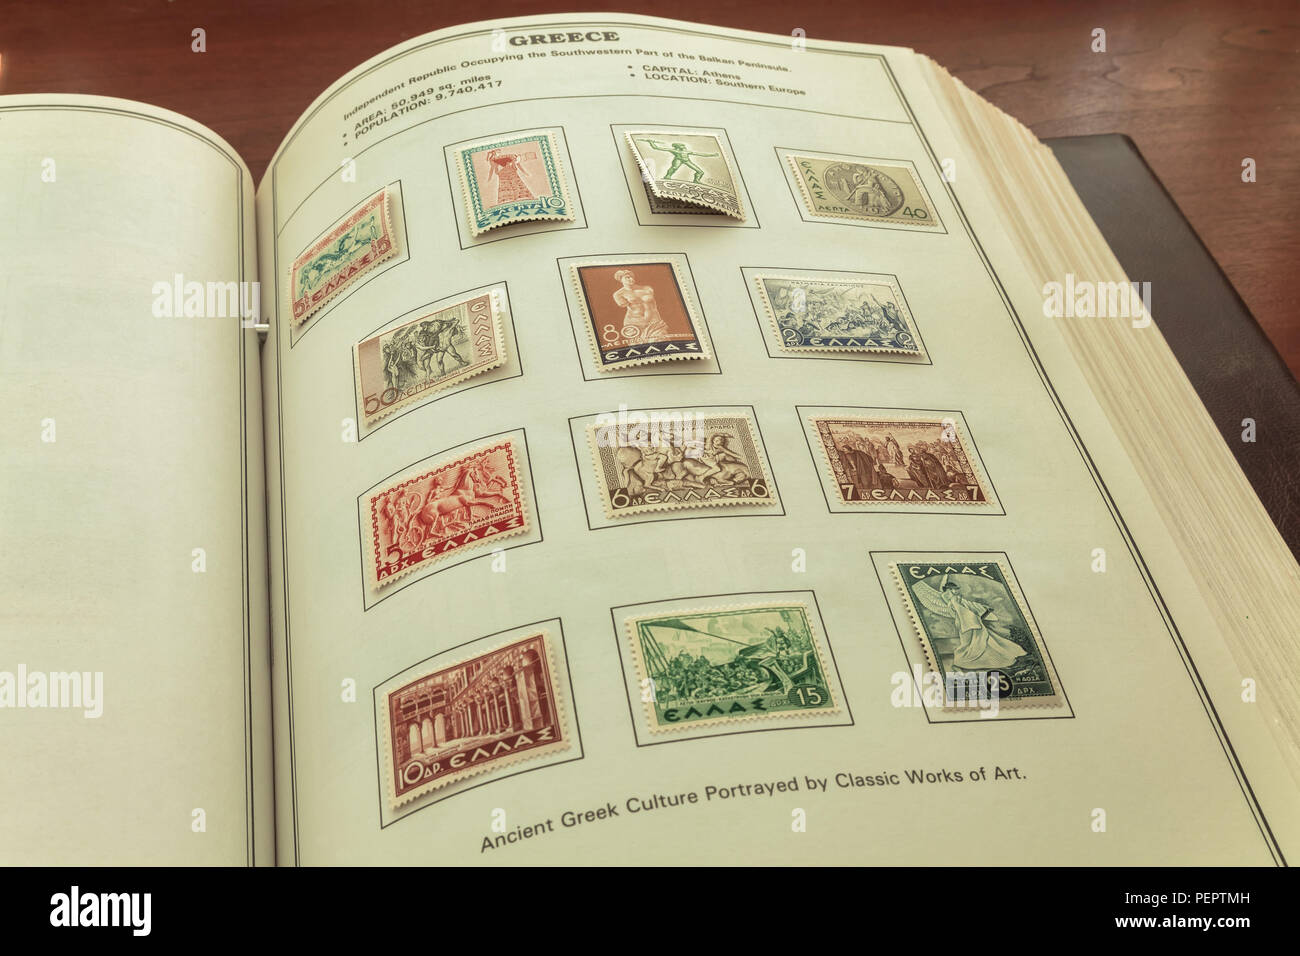 Stamps collection album with one page containing a set of commemorative stamps portraying ancient Greek culture by classic works of art Stock Photo